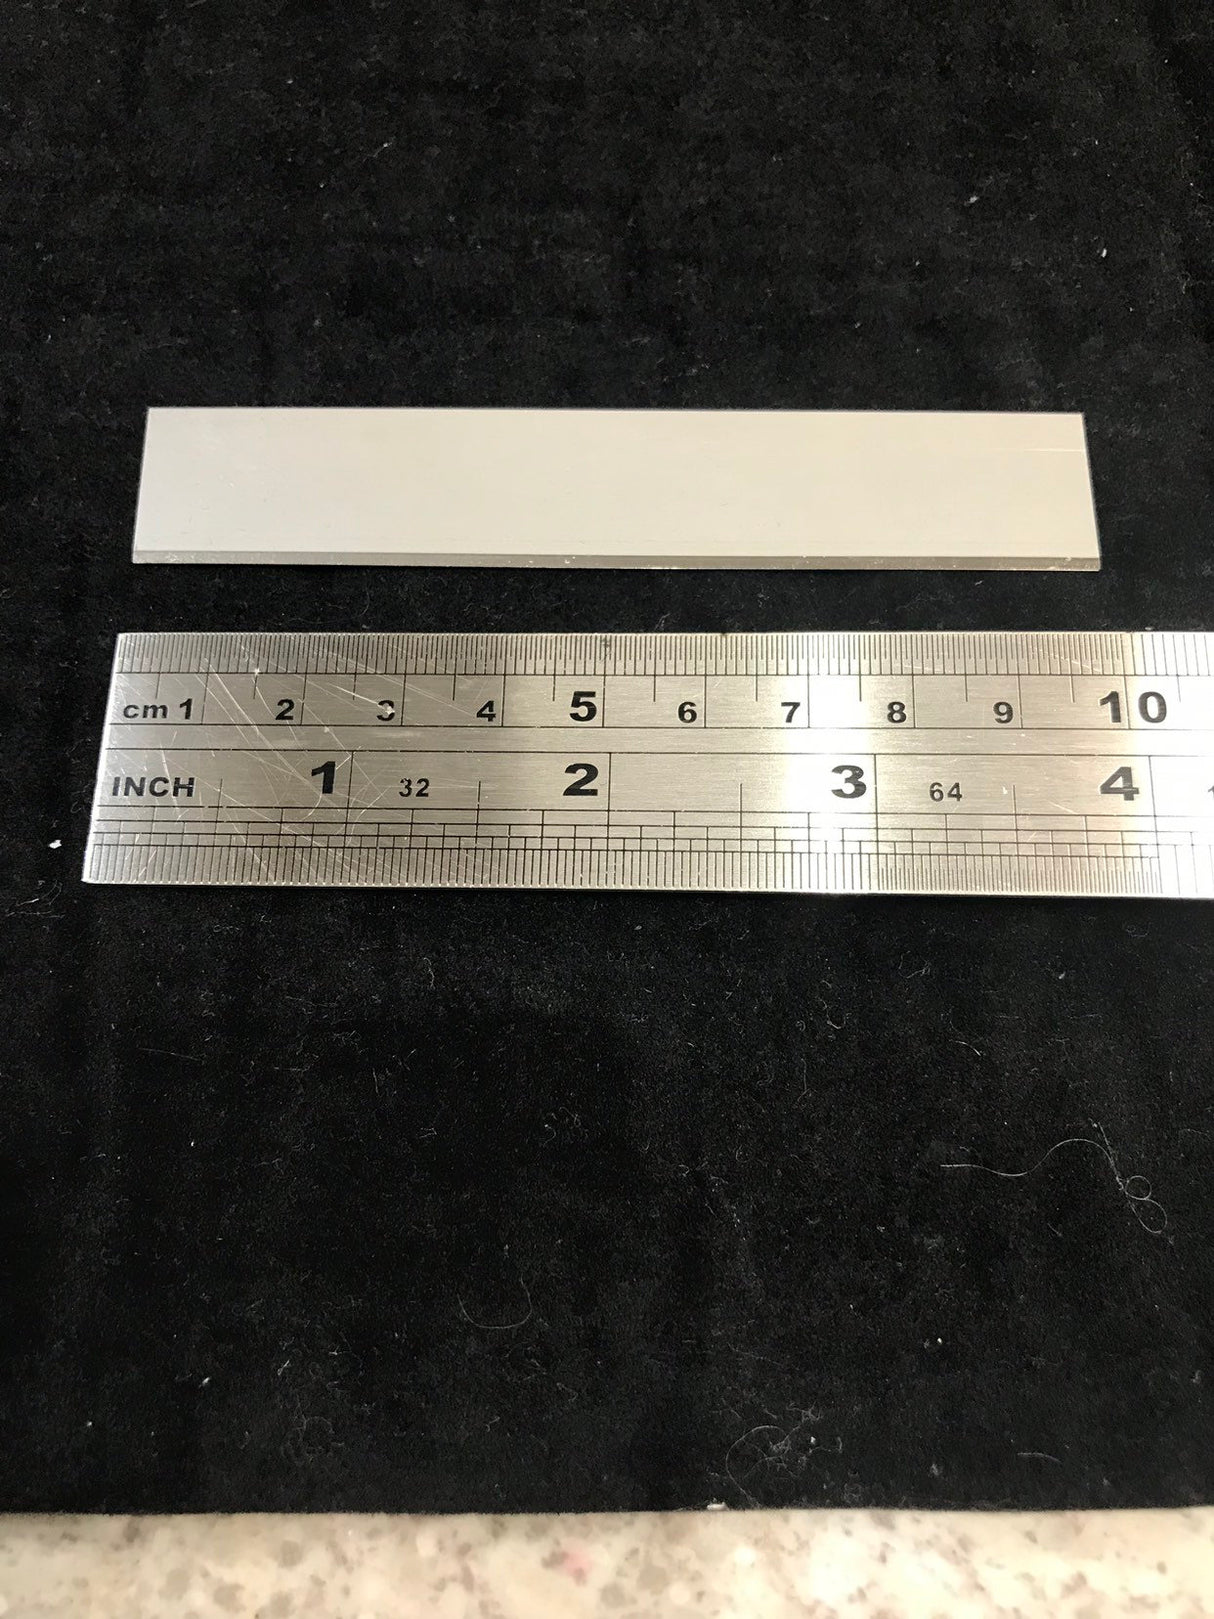 10cm or 100mm metal blade for polymer clay displayed with ruler in cm and inches